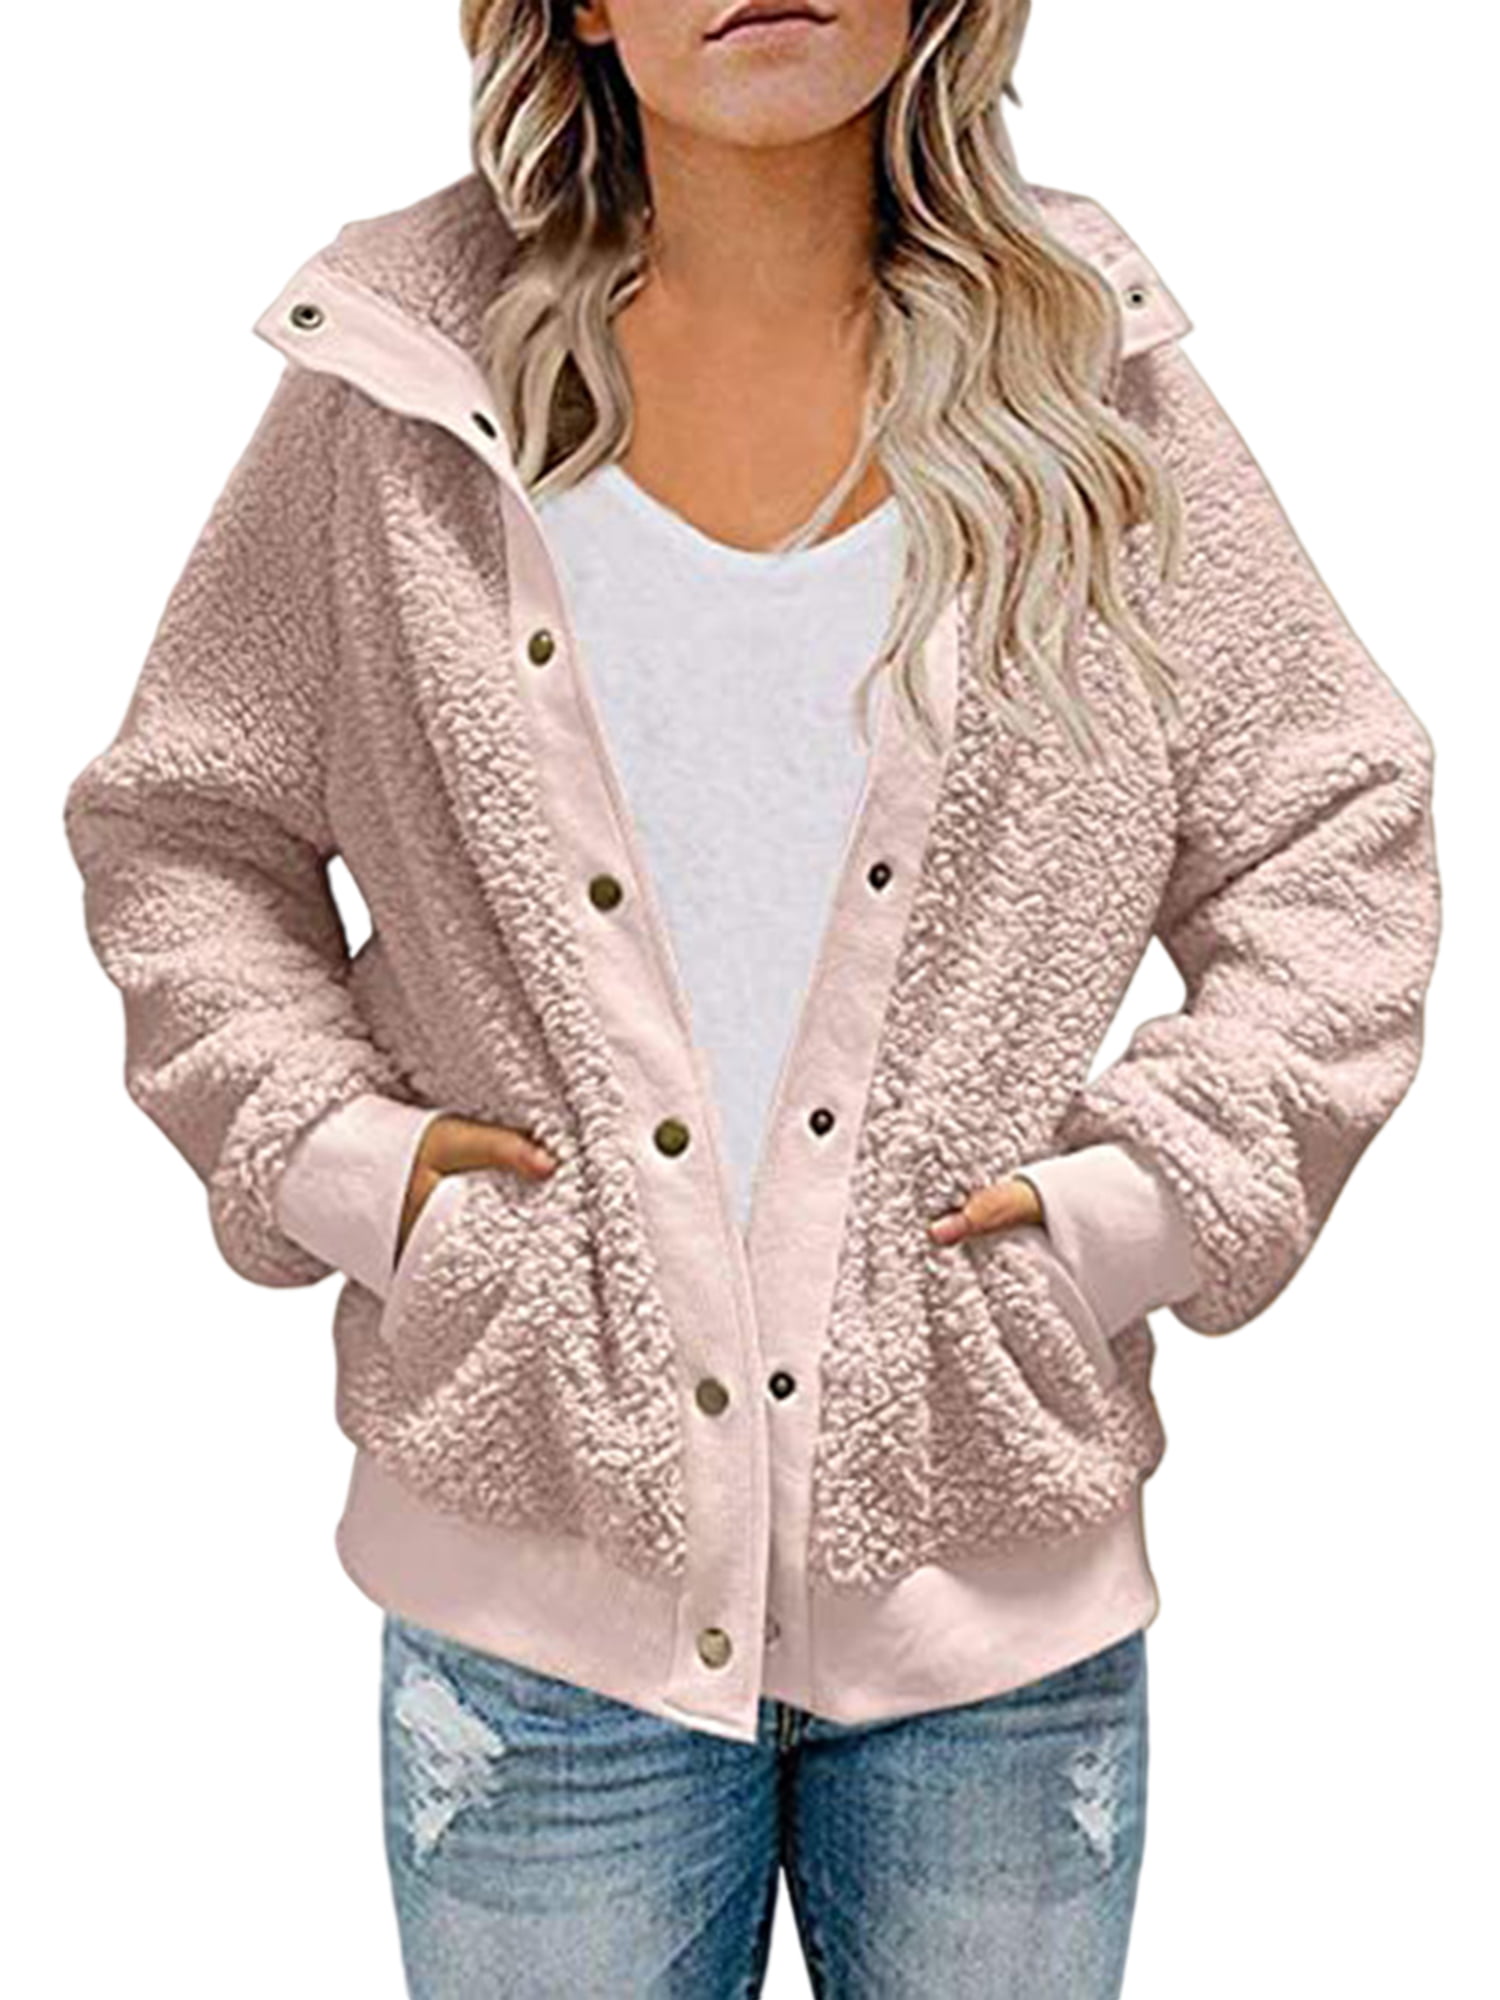 S.Charma Fluffy Fuzzy Fleece Thick Coat Outwear with Pocket Women Long Sleeve Printed Hooded Jacket 